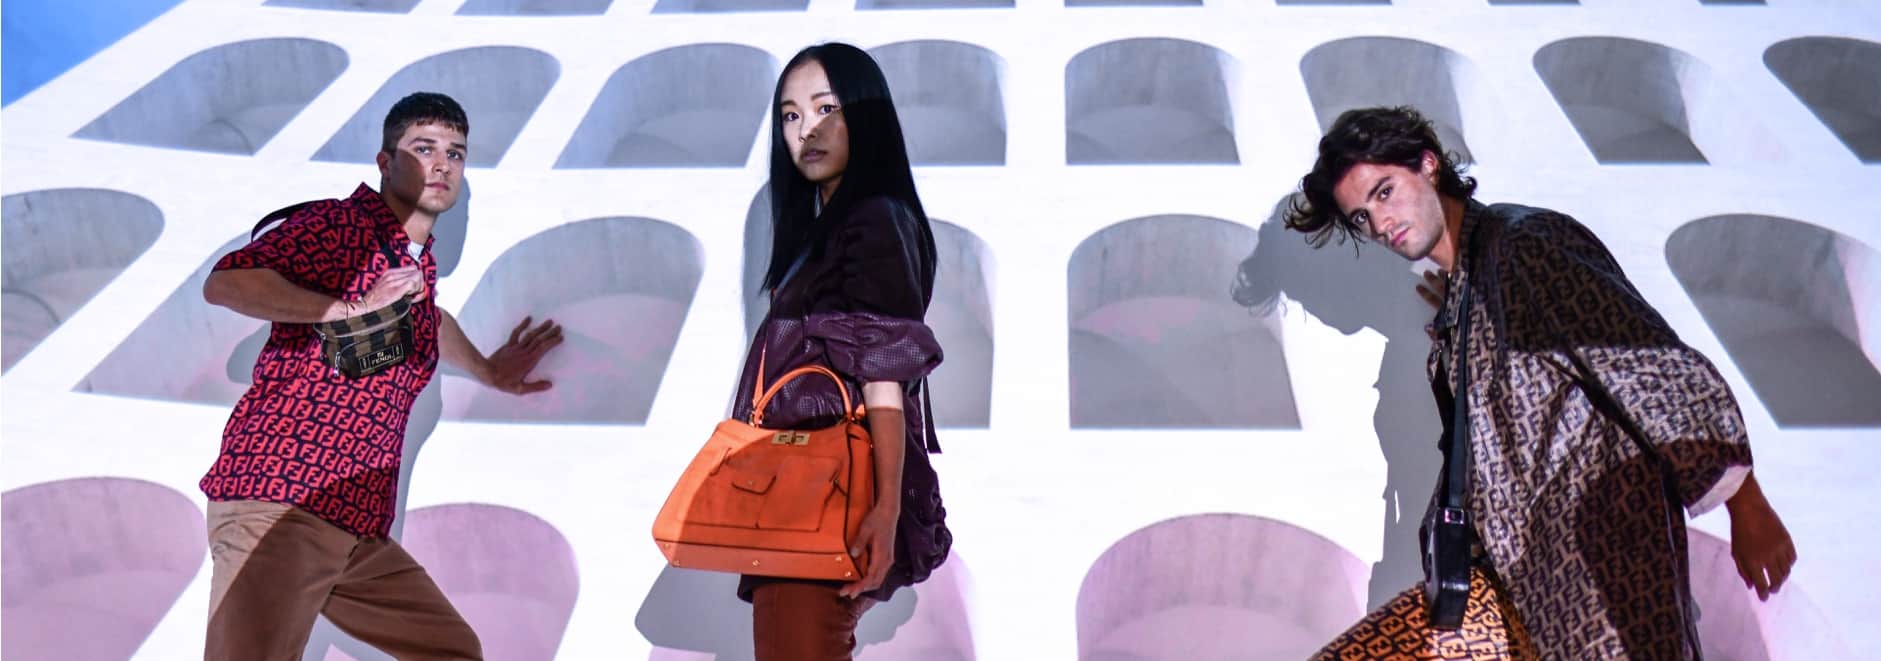 What is Fendi's marketing strategy?